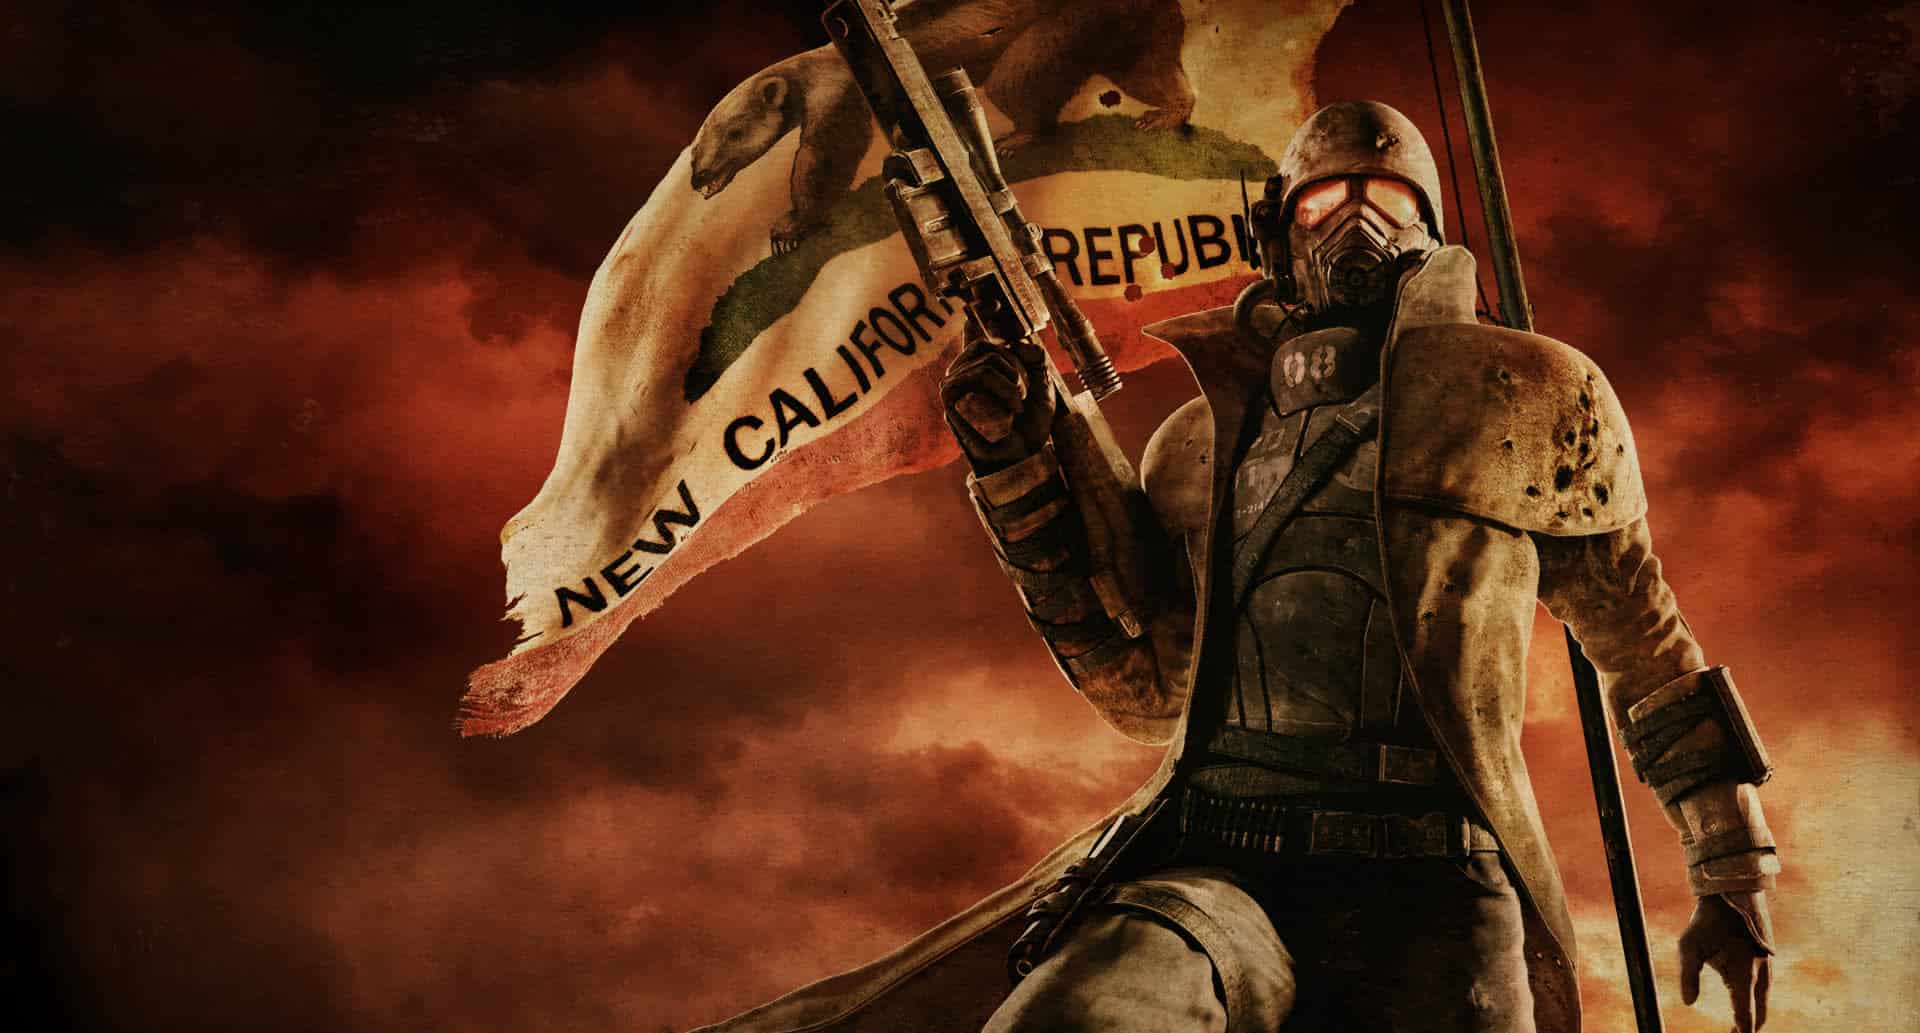 An NCR ranger stands in front of the New California Flag in Fallout New Vegas